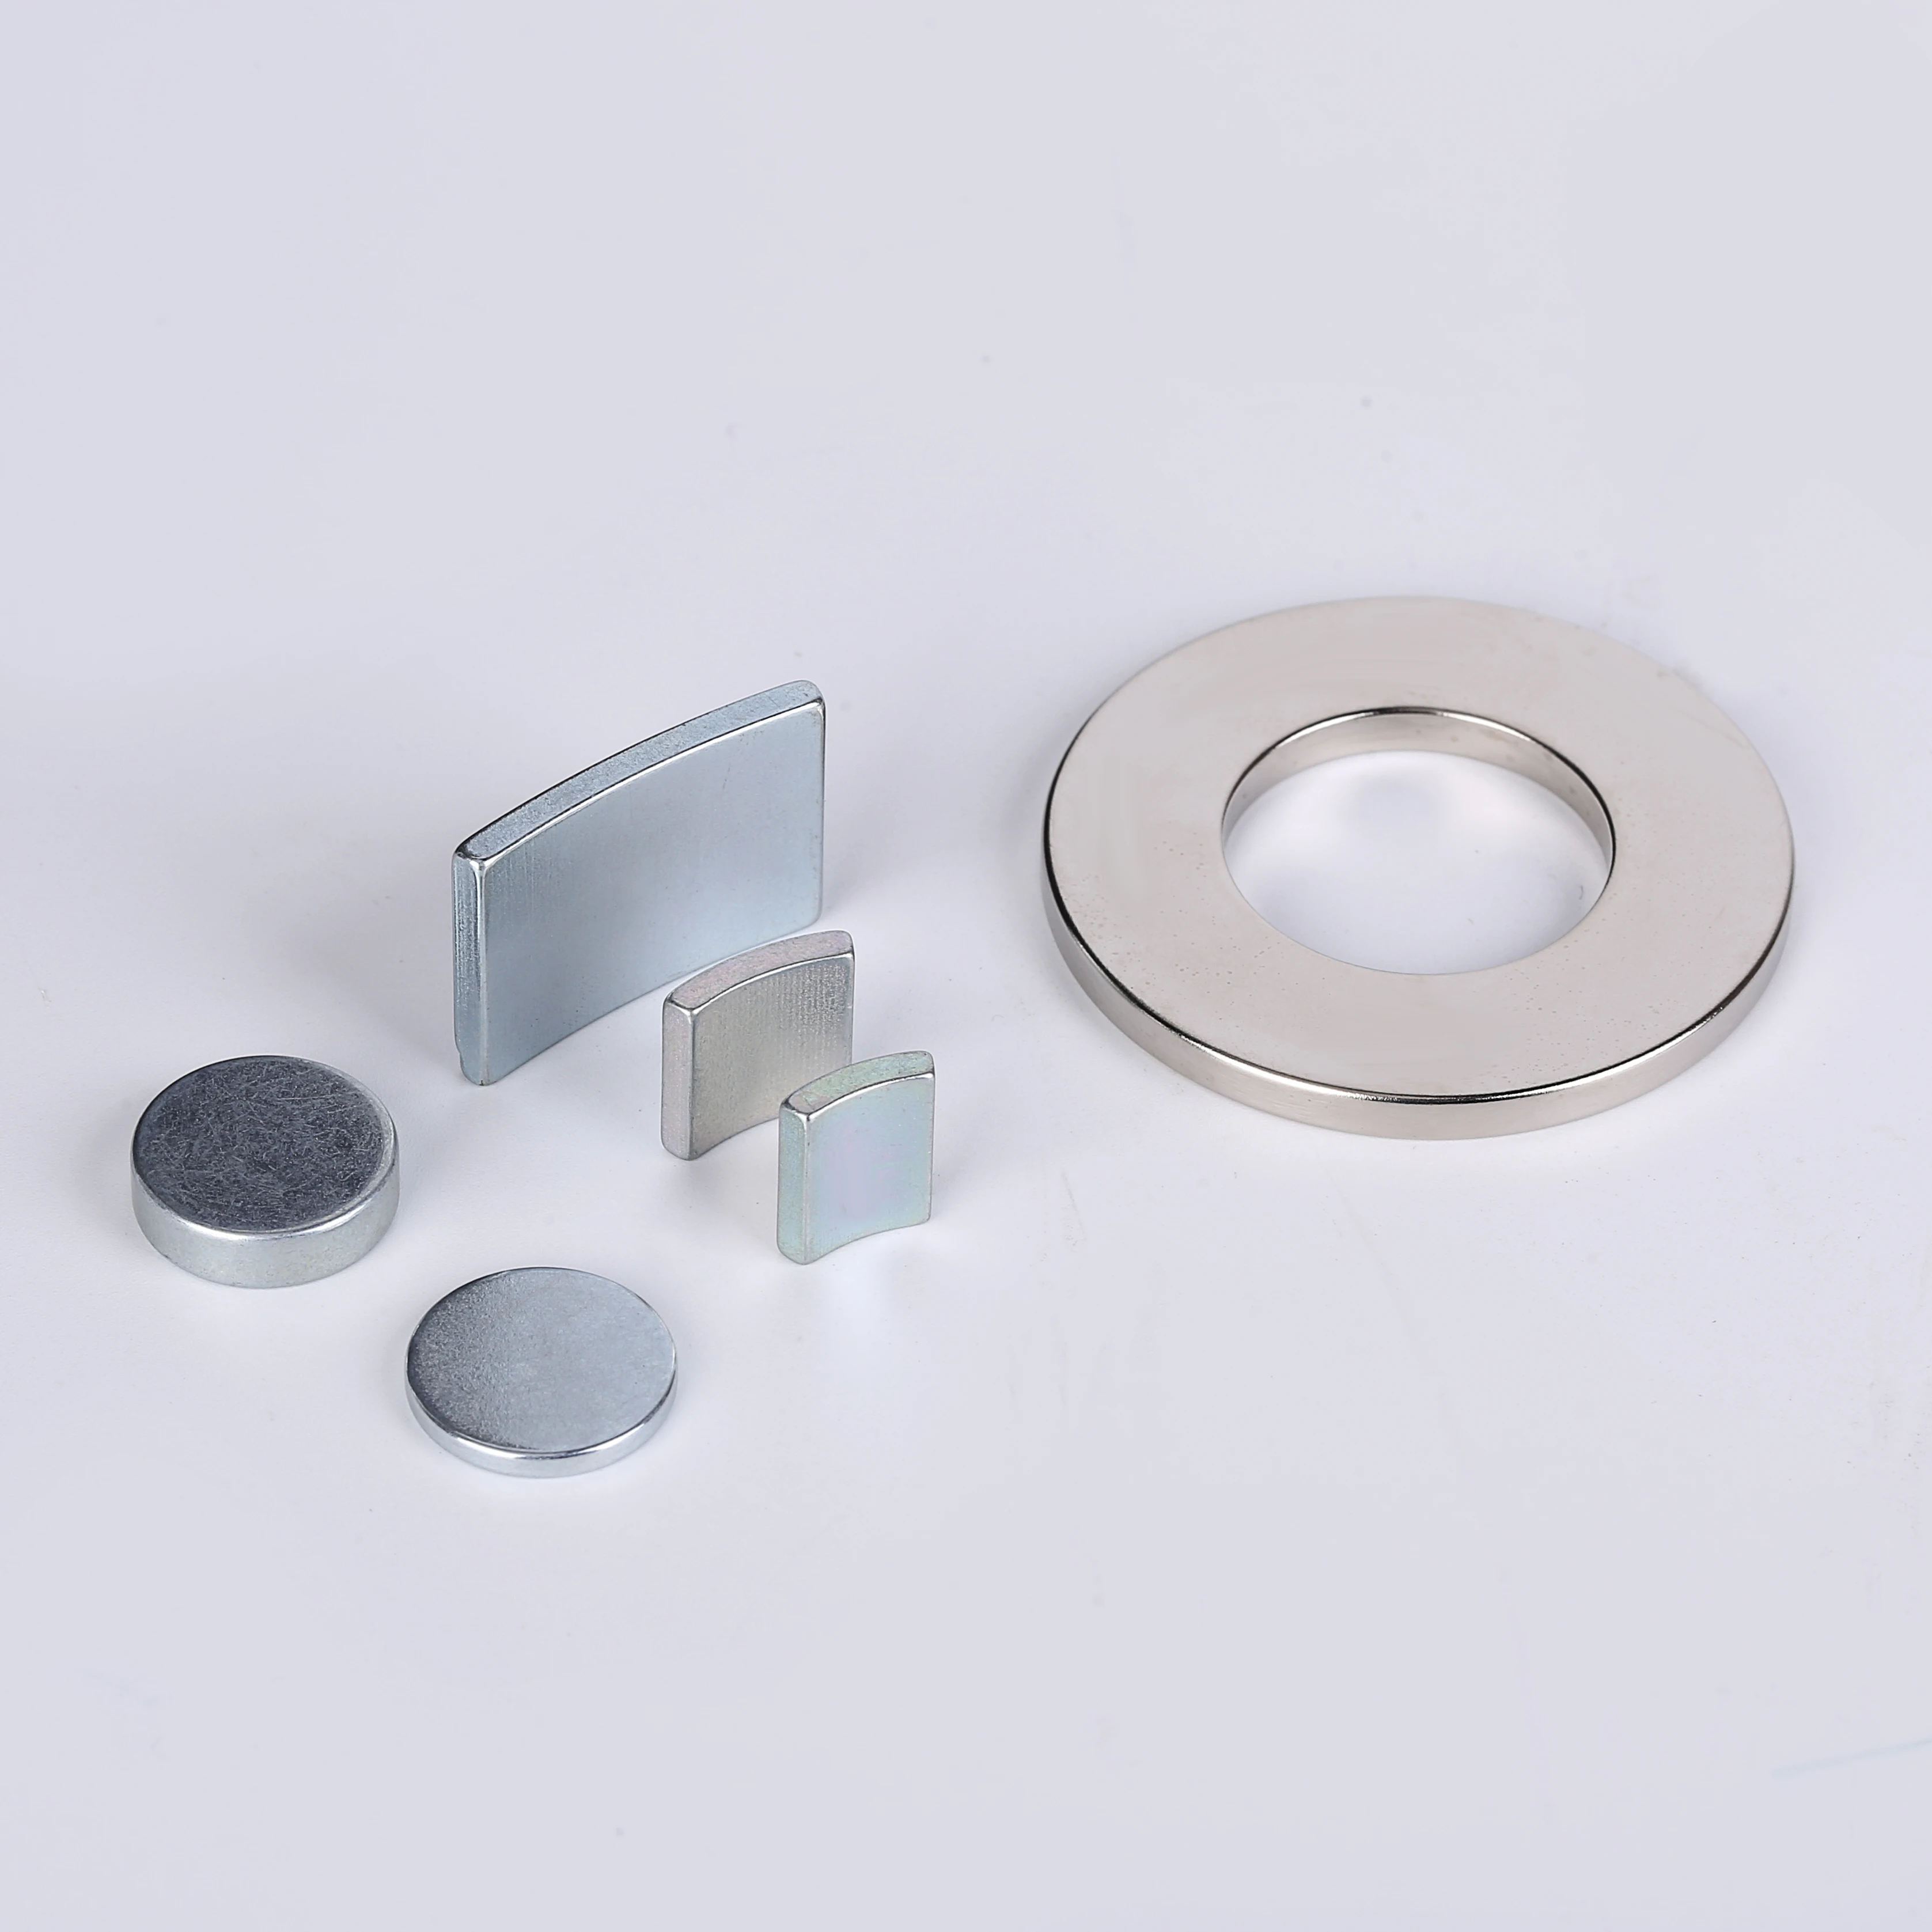 ære kobling Høring High-quality Magnetic Nd-fe-b Magnets For Clothing And Fabrics - Buy  High-quality Magnetic Nd-fe-b Magnet,Strong Magnets For Clothing,Magnets  For Purses Product on Alibaba.com